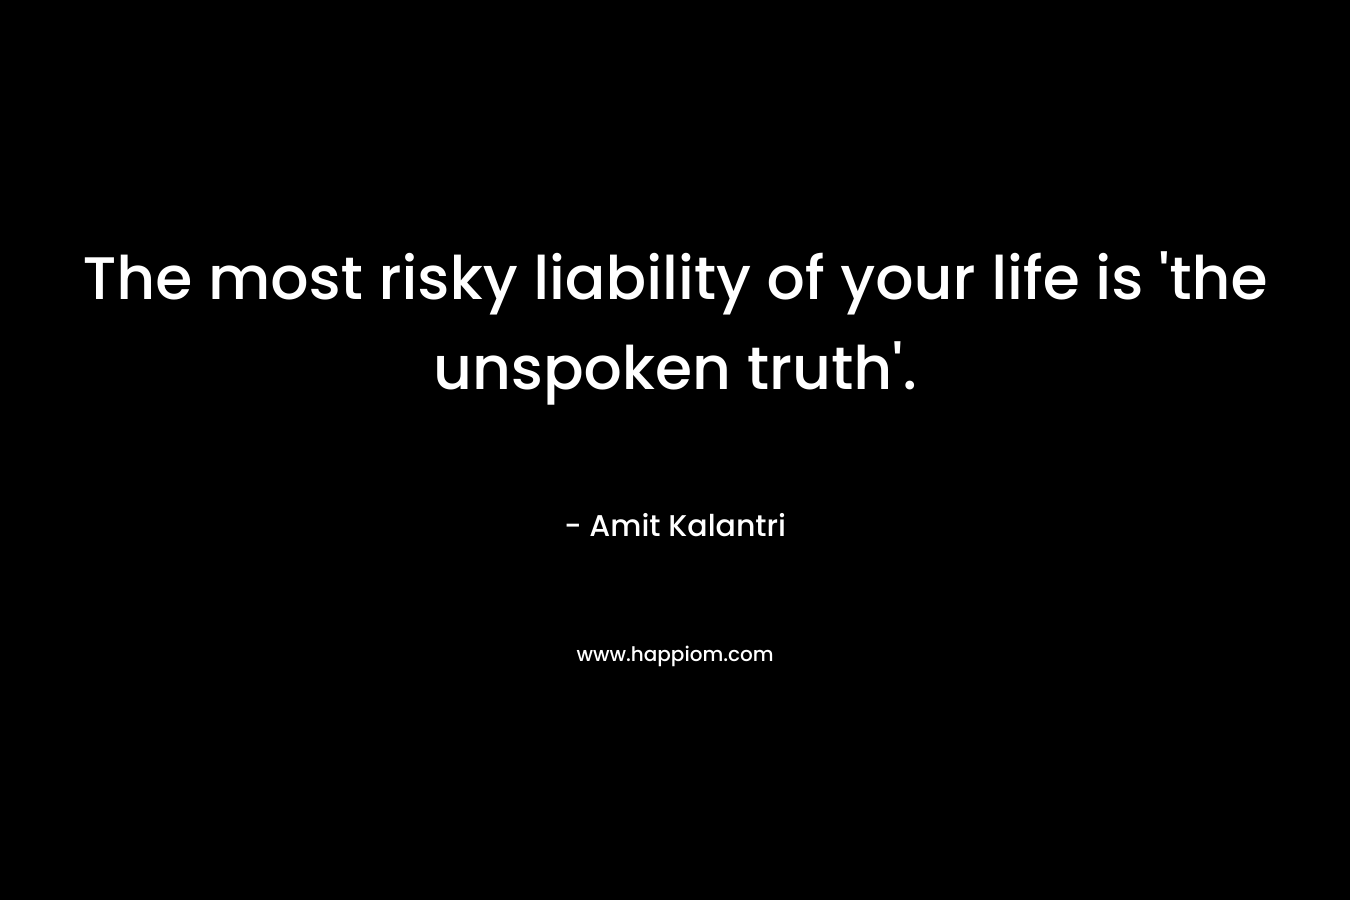 The most risky liability of your life is ‘the unspoken truth’. – Amit Kalantri